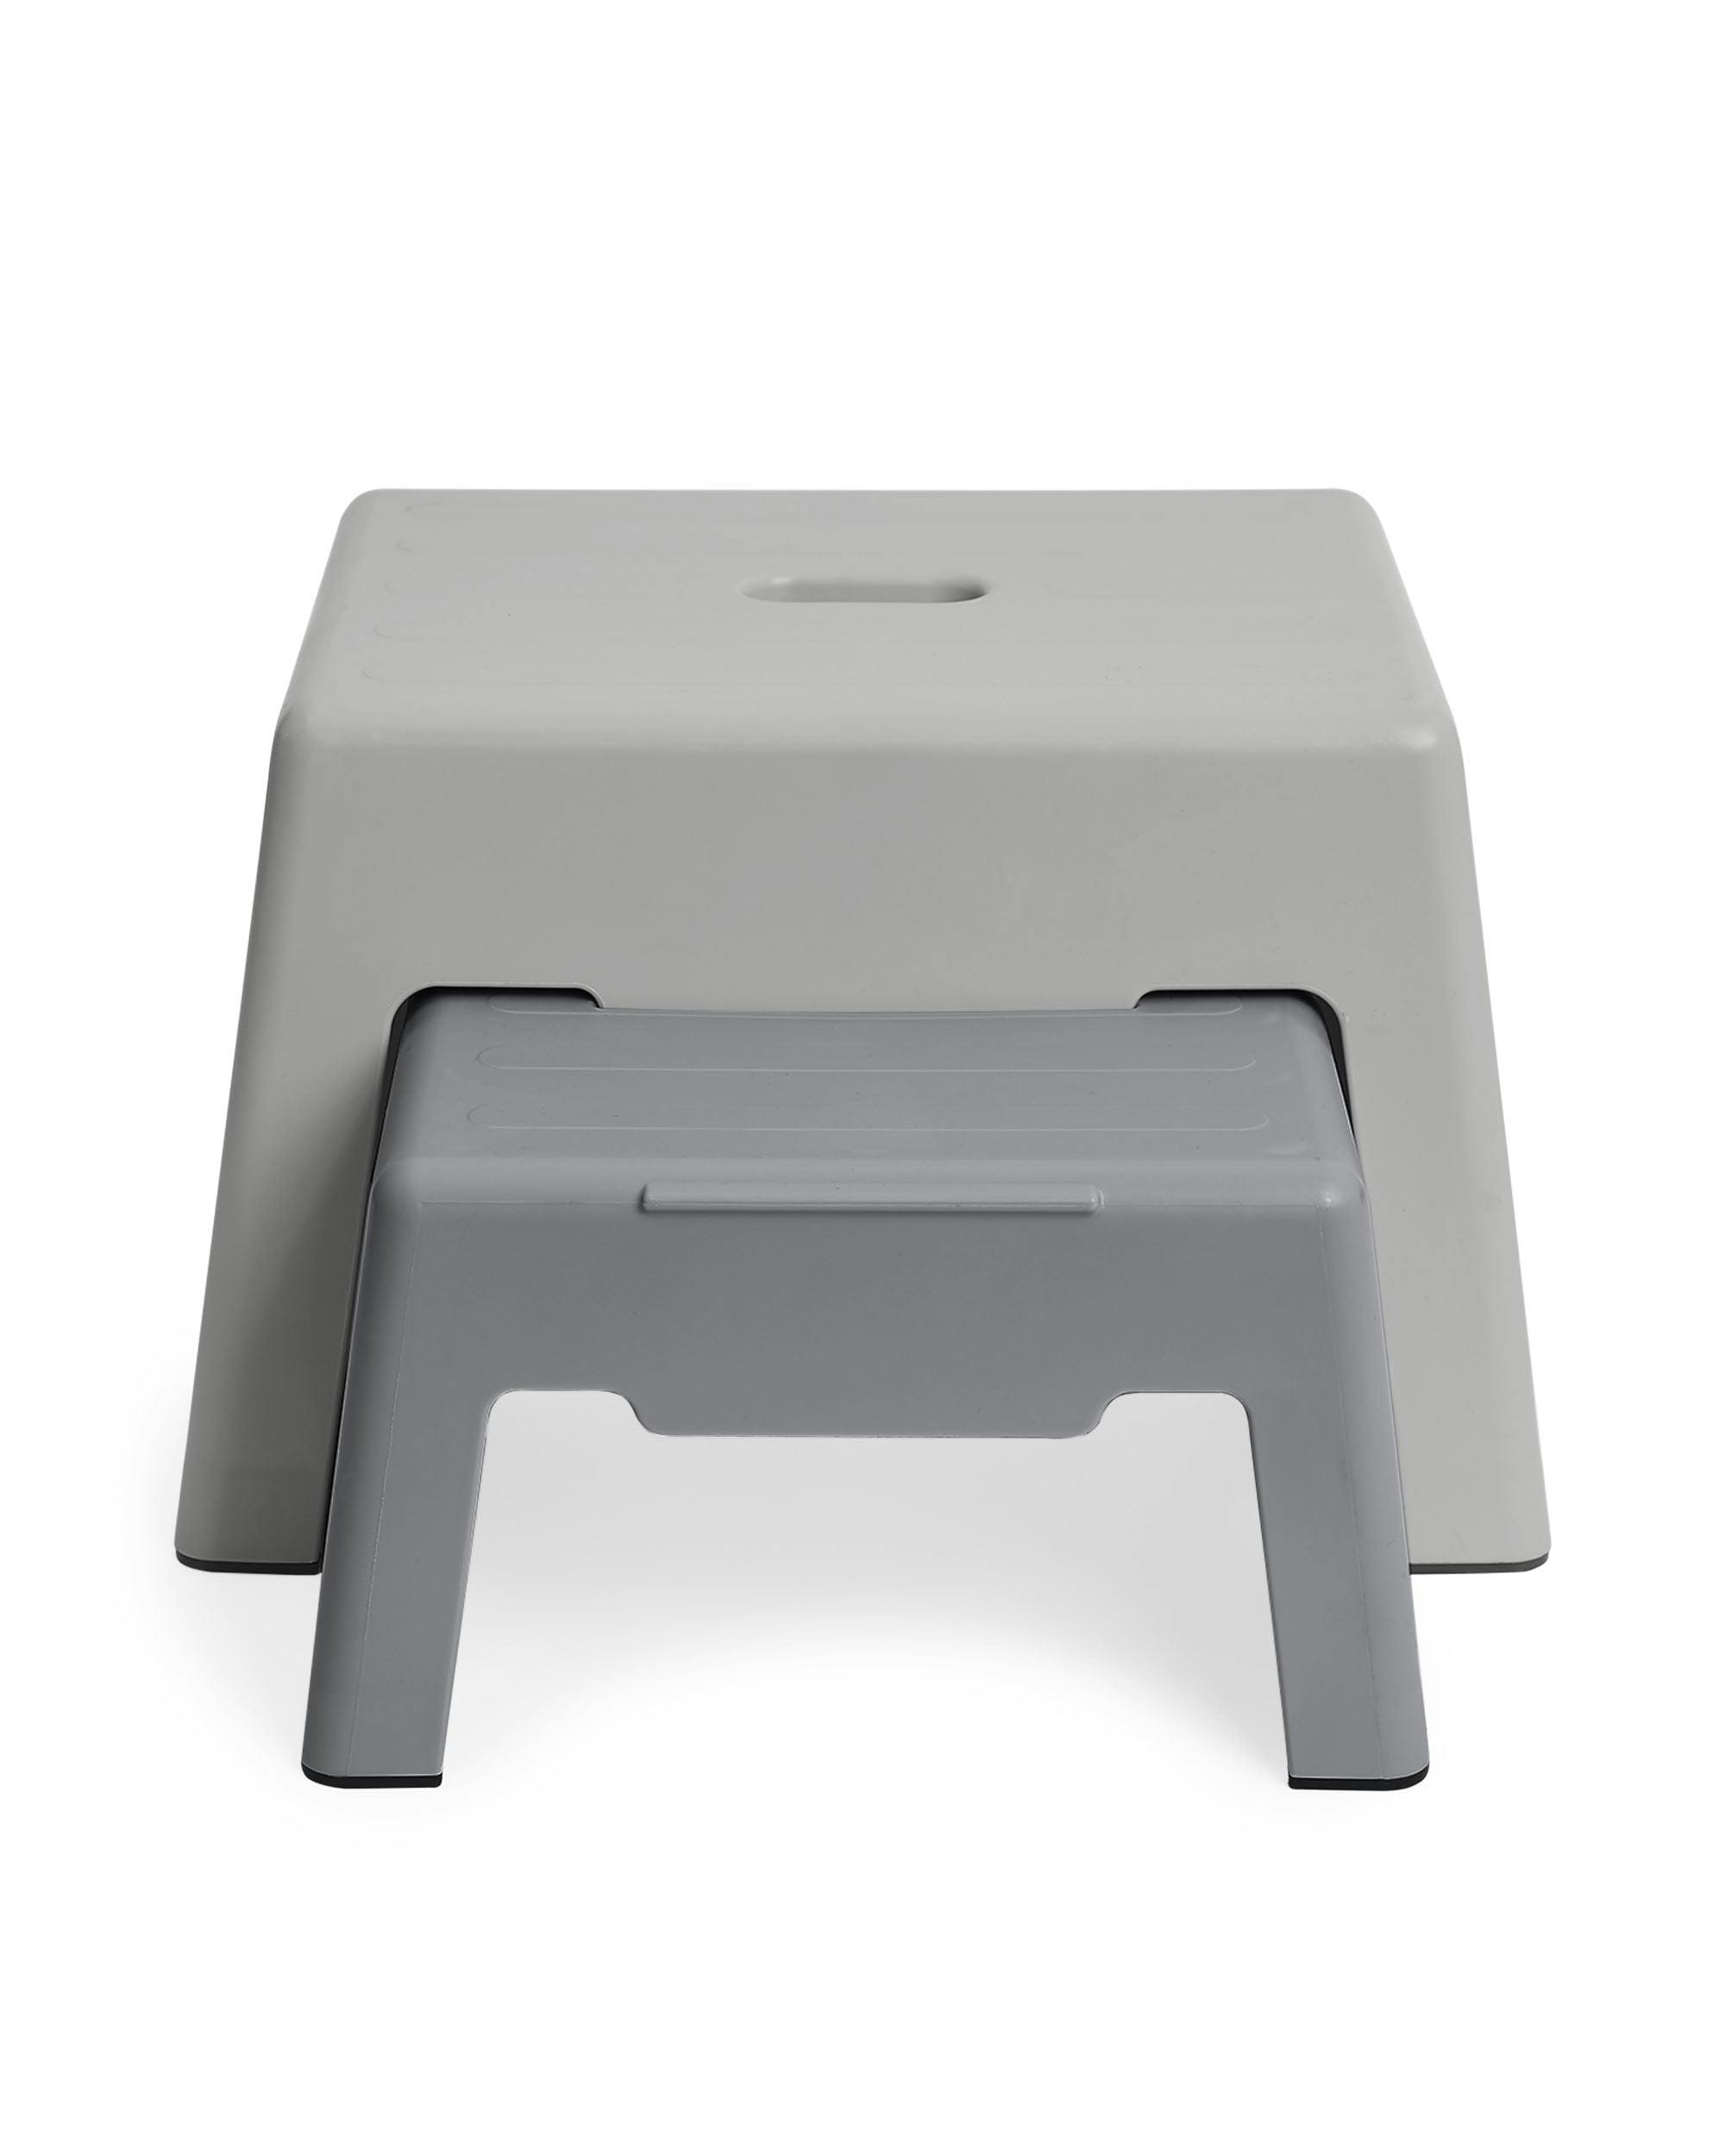 Toddler Independence 2-in-1 Nesting Step Stool in White